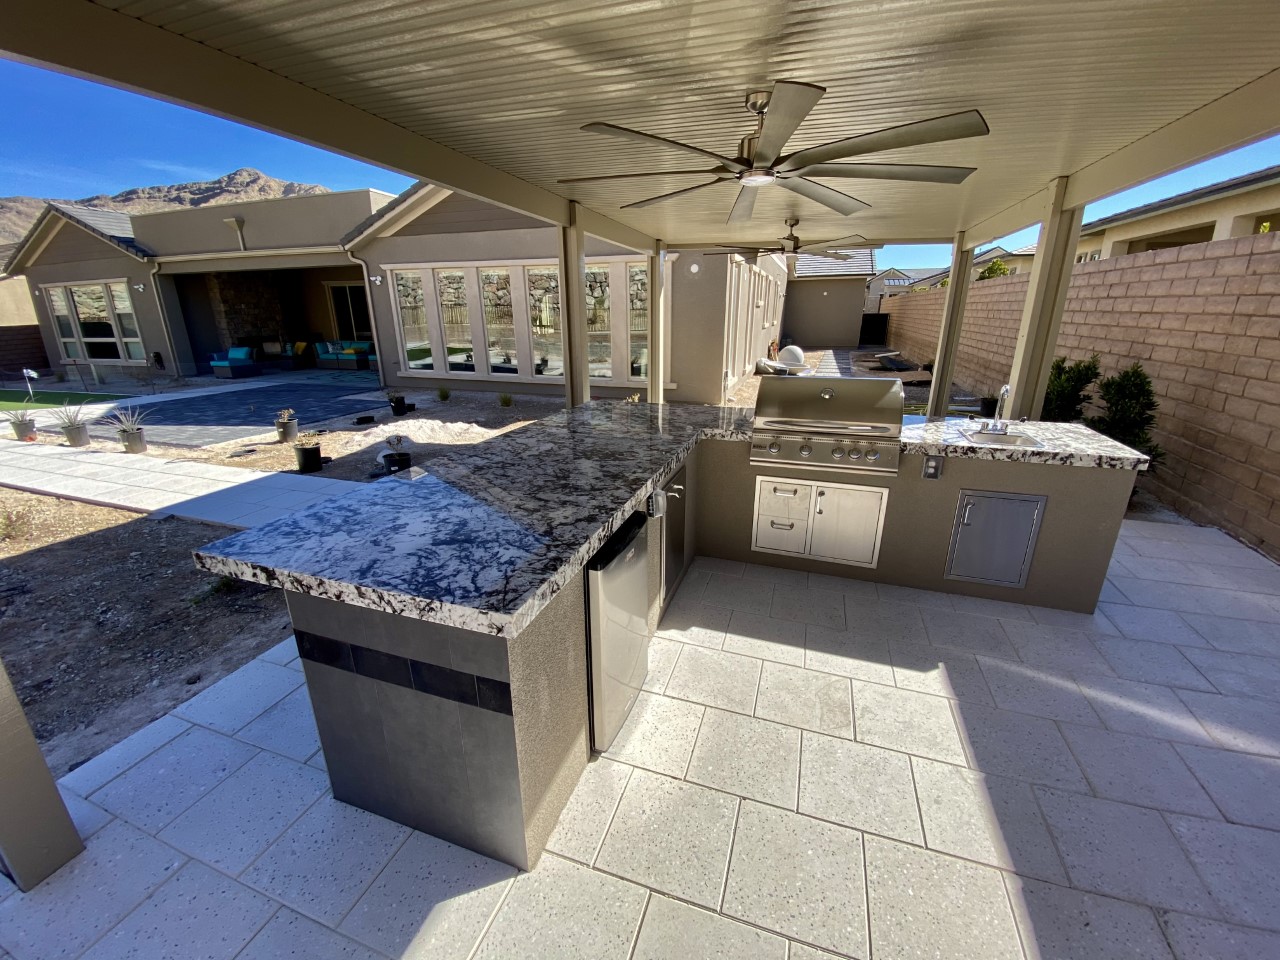 A large outdoor kitchen with an overhead fan.